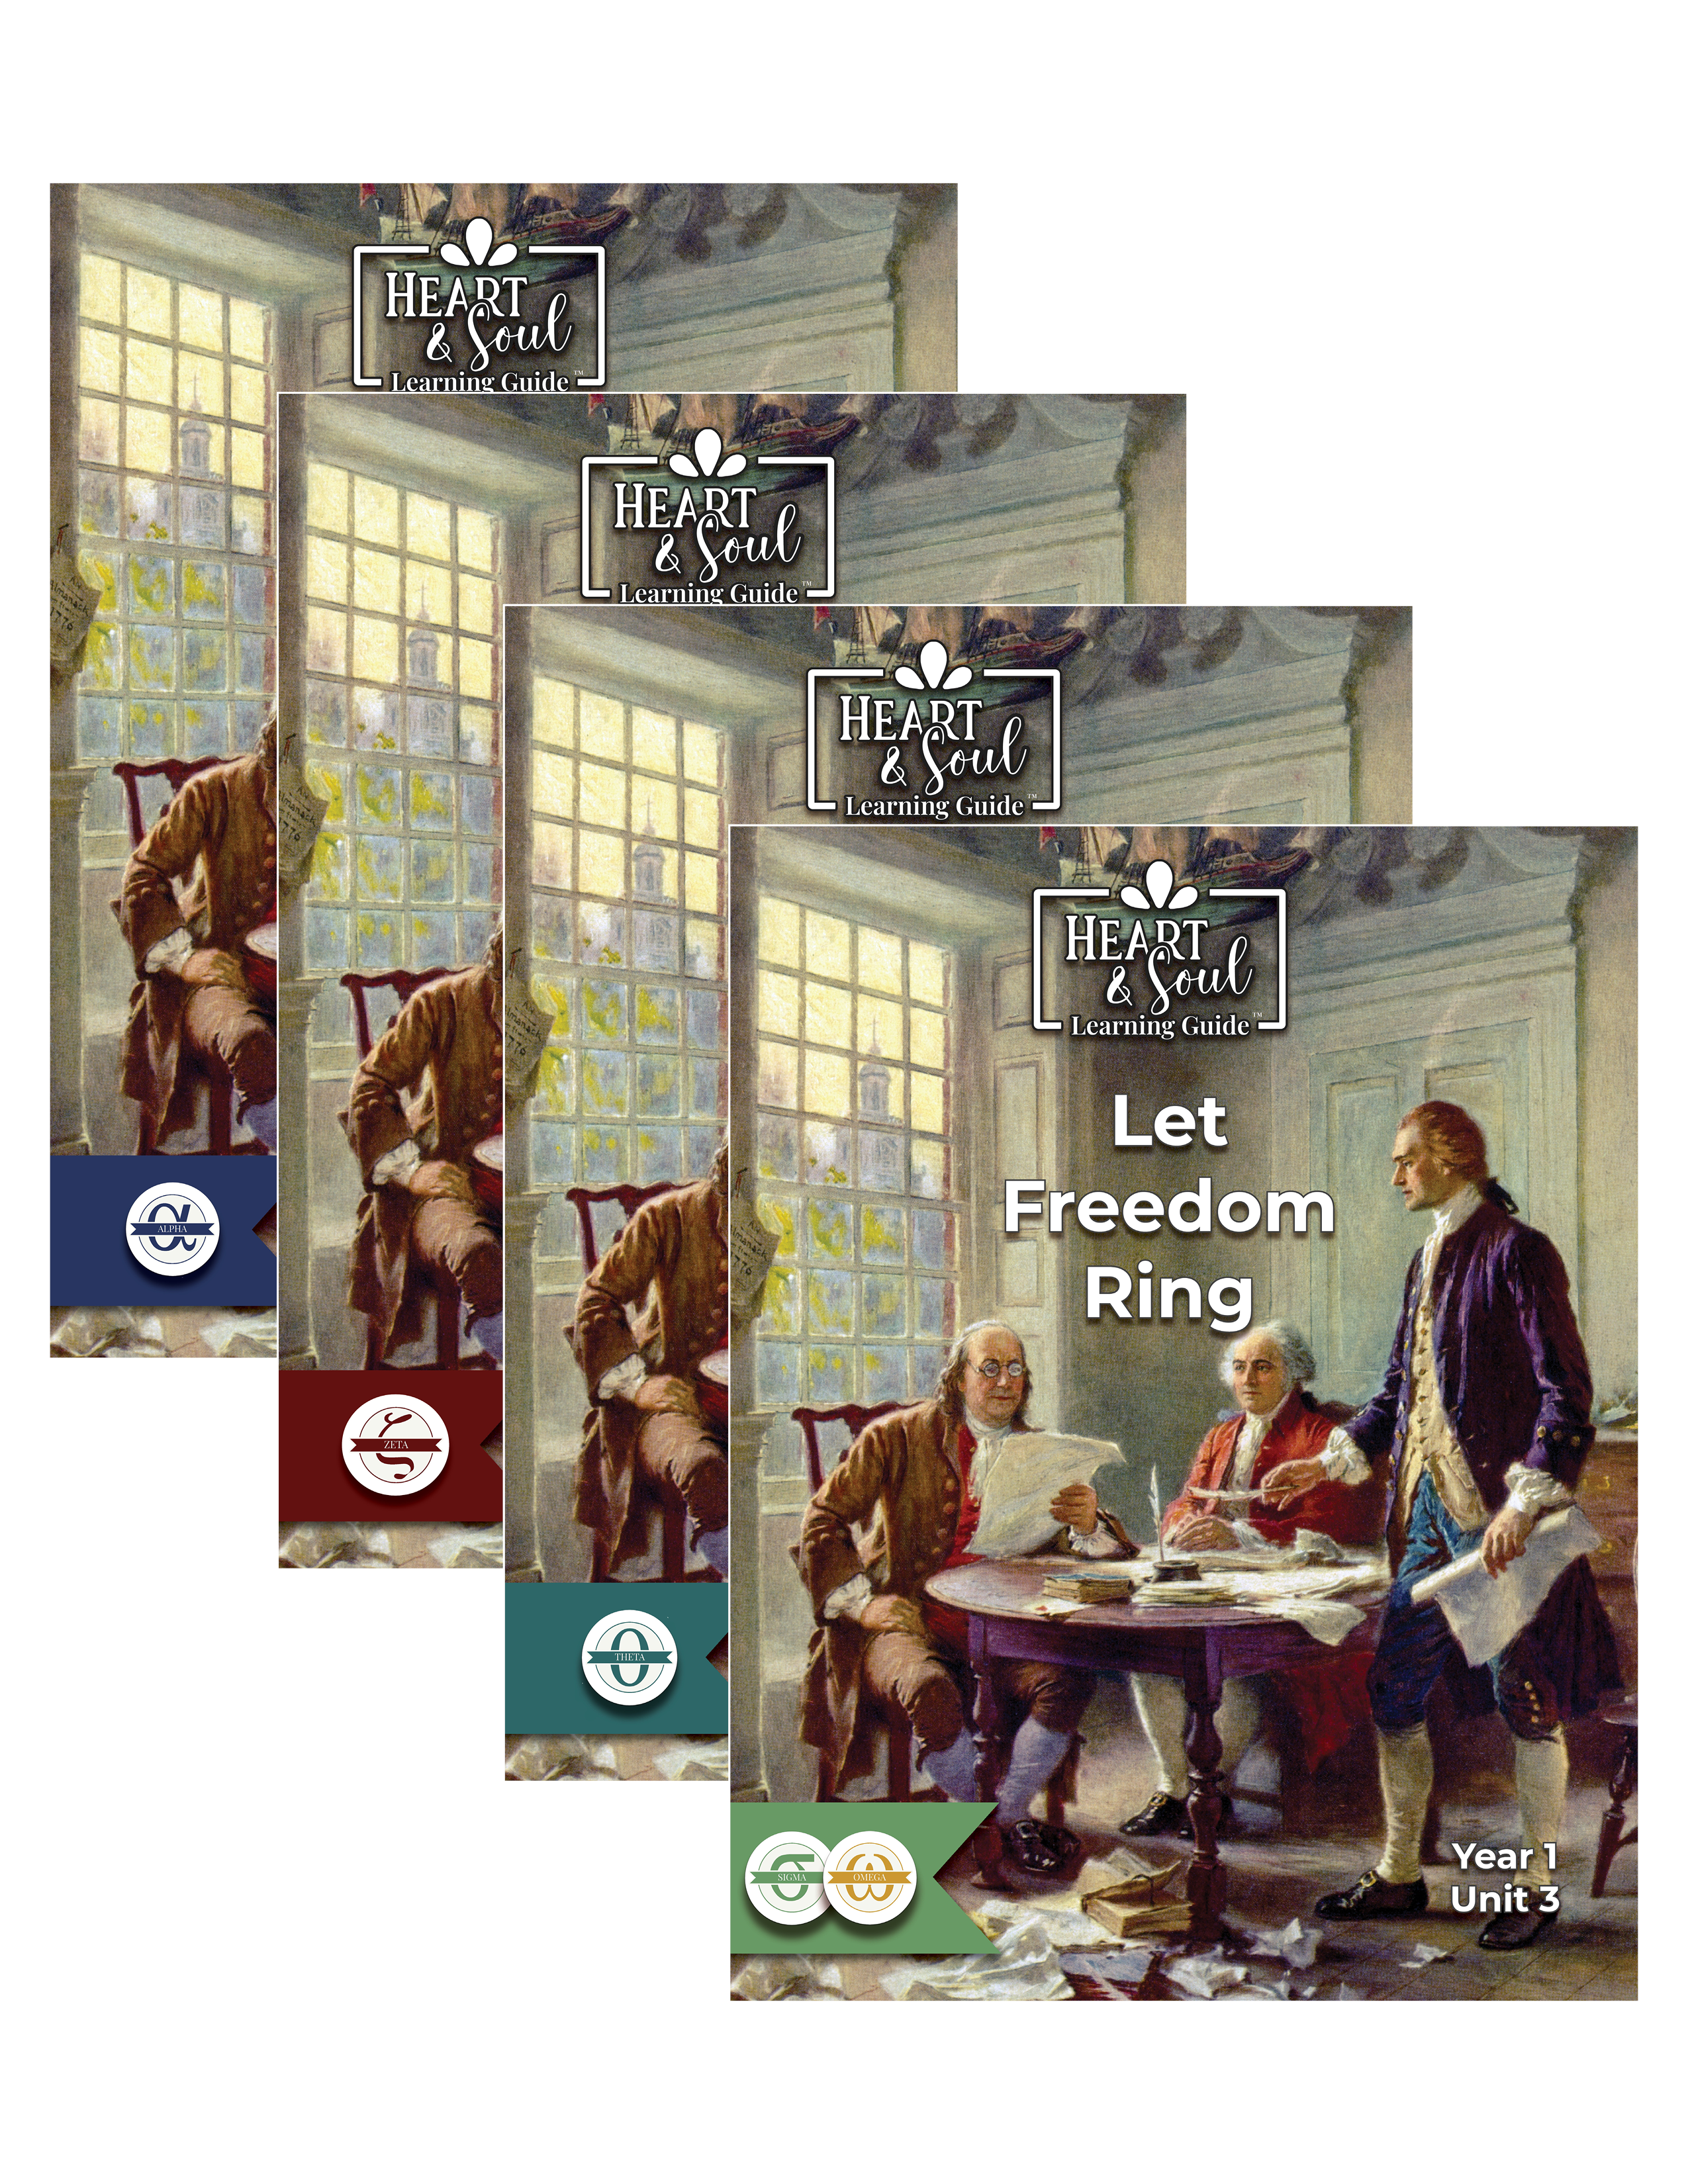 PDF American History Student Learning Guide #3: Let Freedom Ring